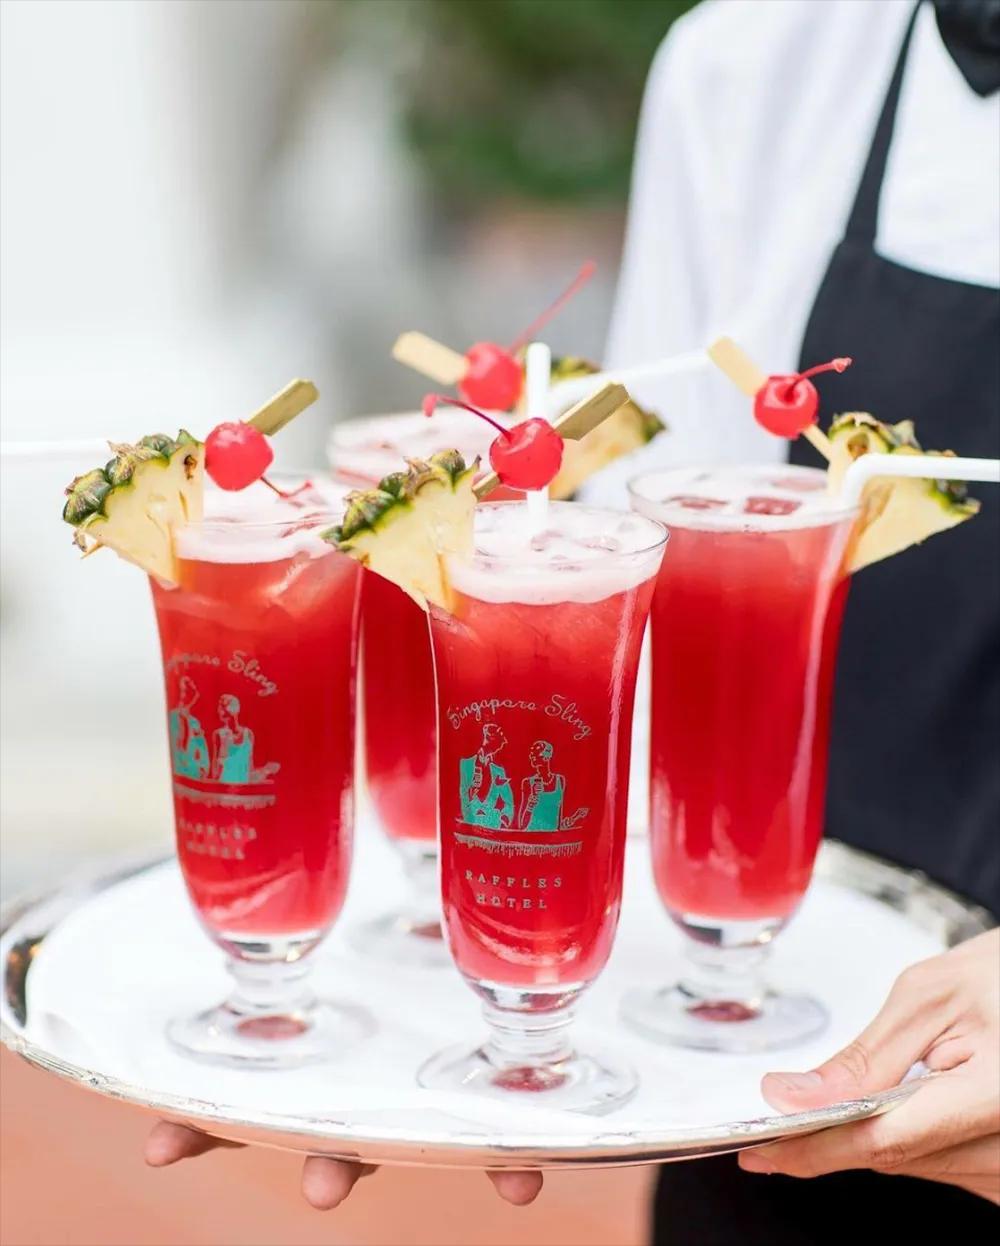 The Singapore Sling: The Story Behind Singapore’s Iconic Cocktail